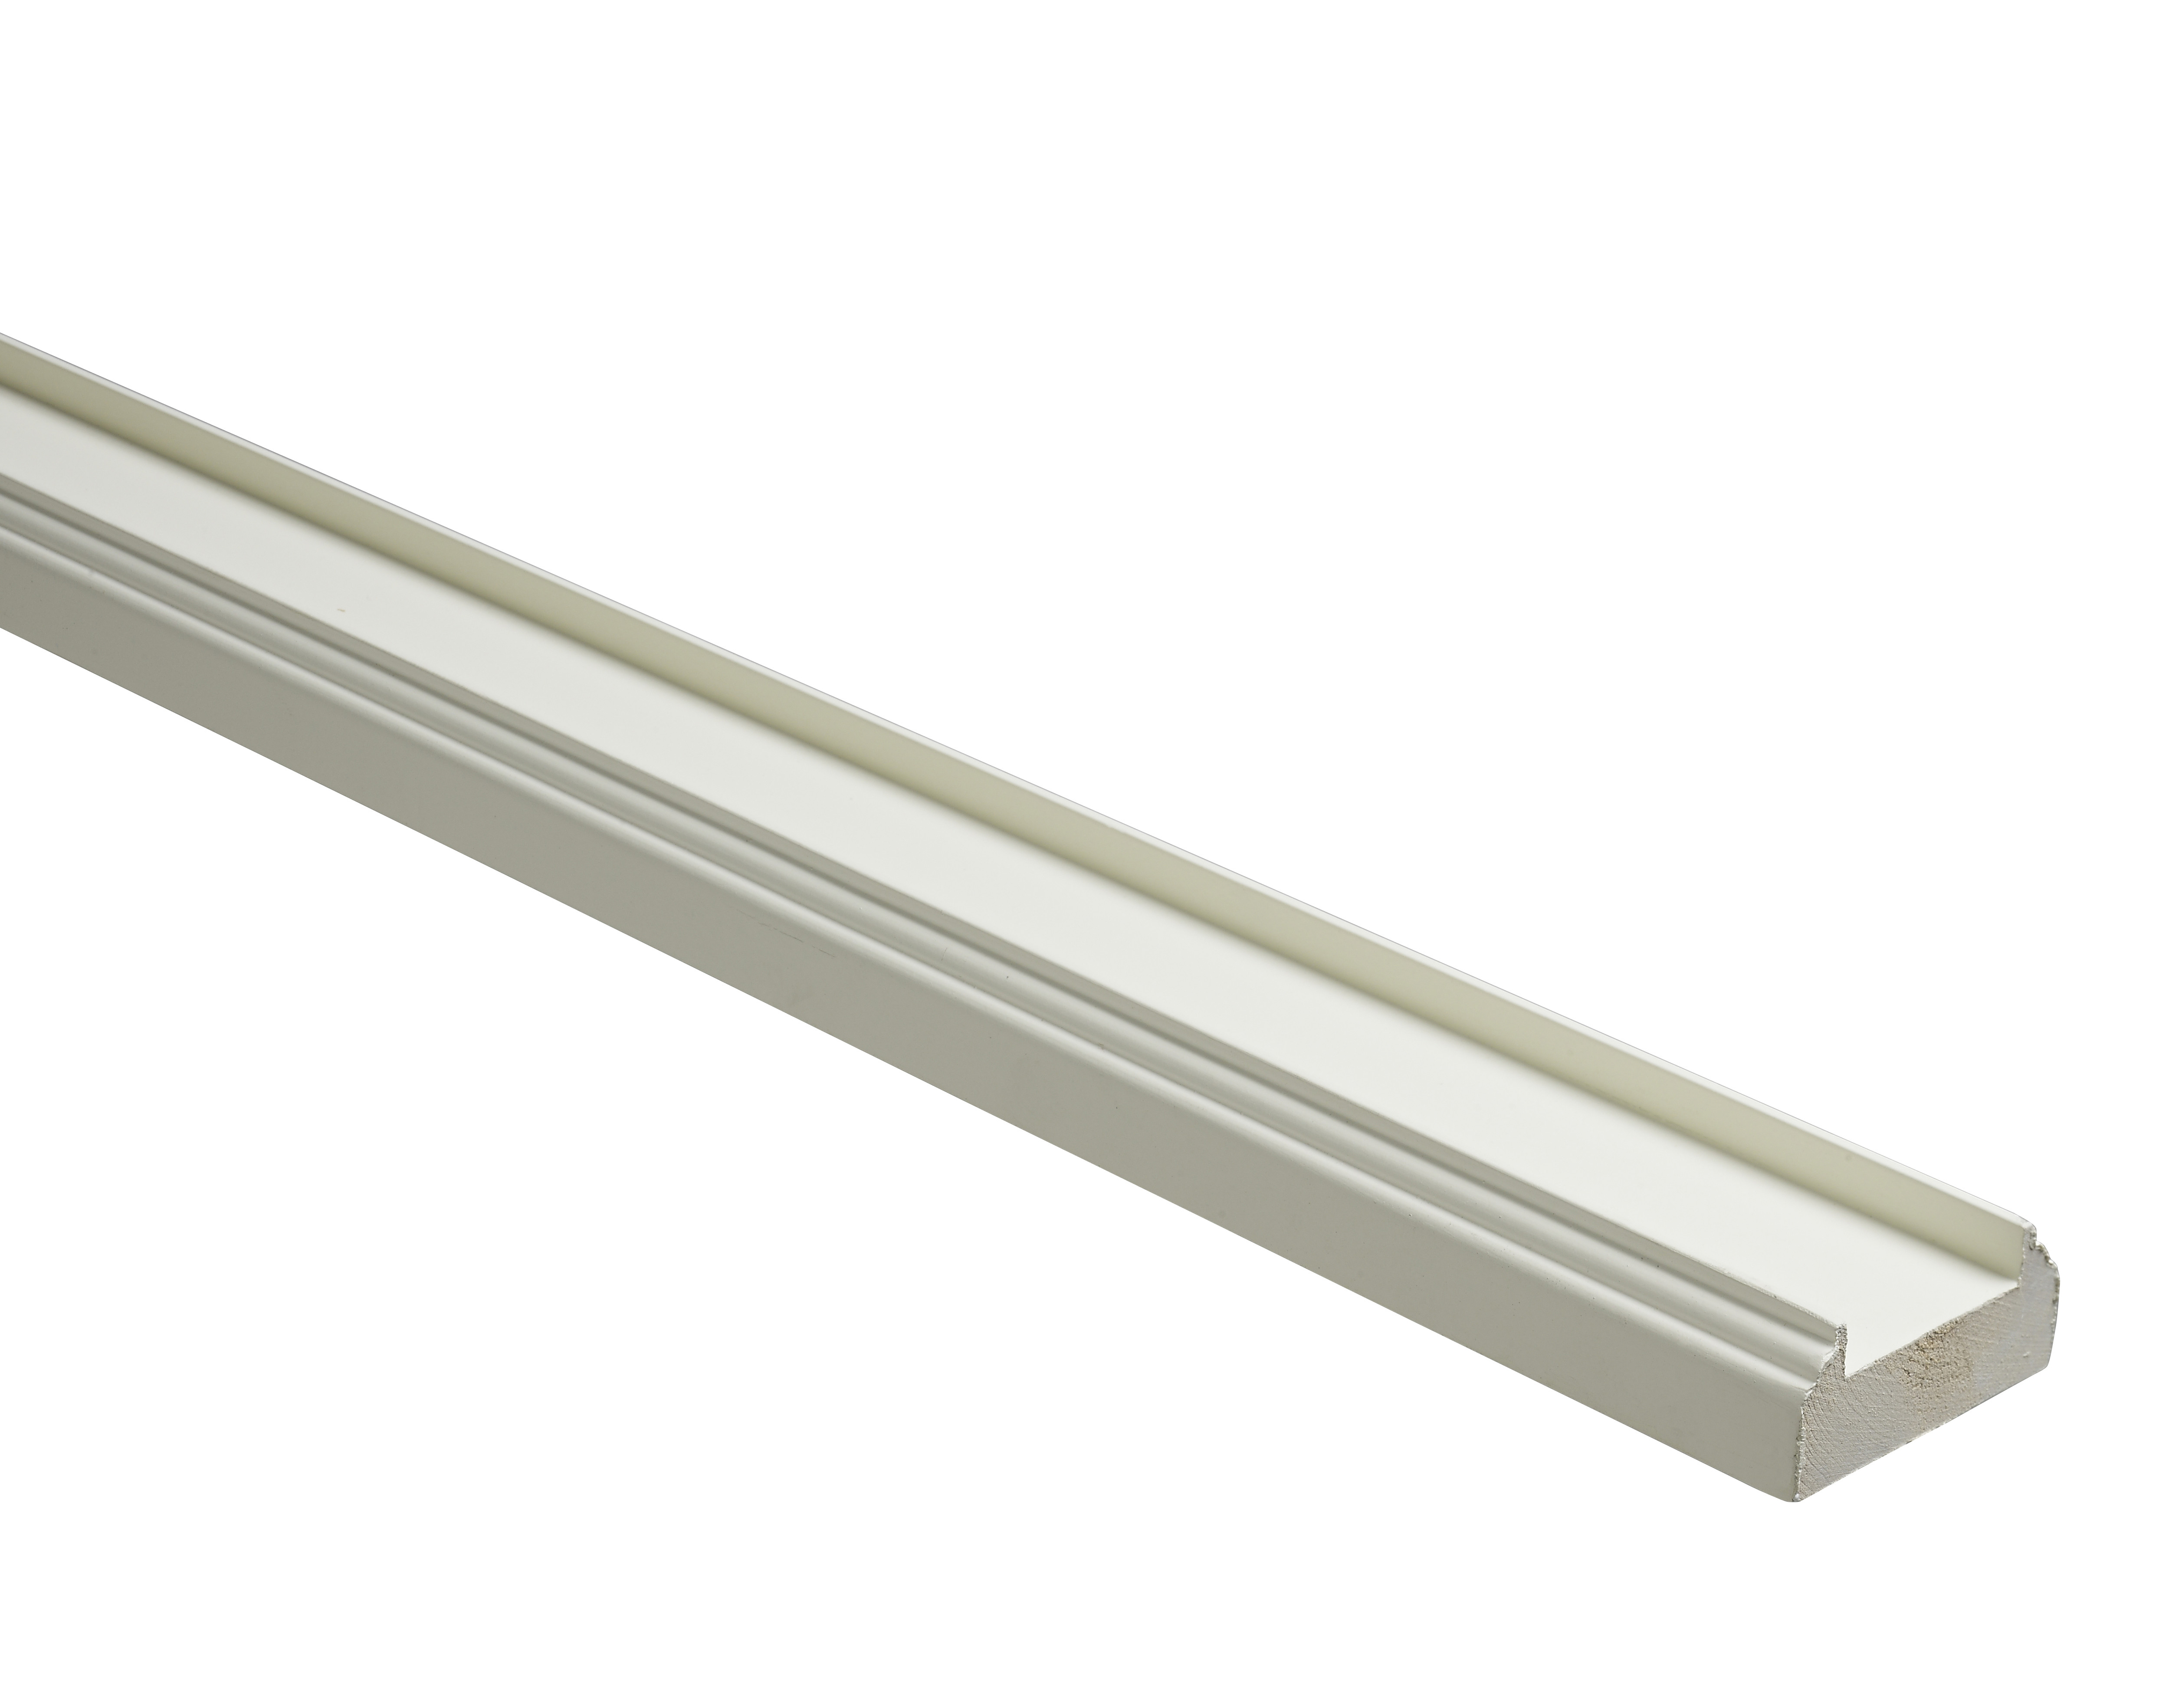 1 Smooth Primed Baserail Prof 3600 41